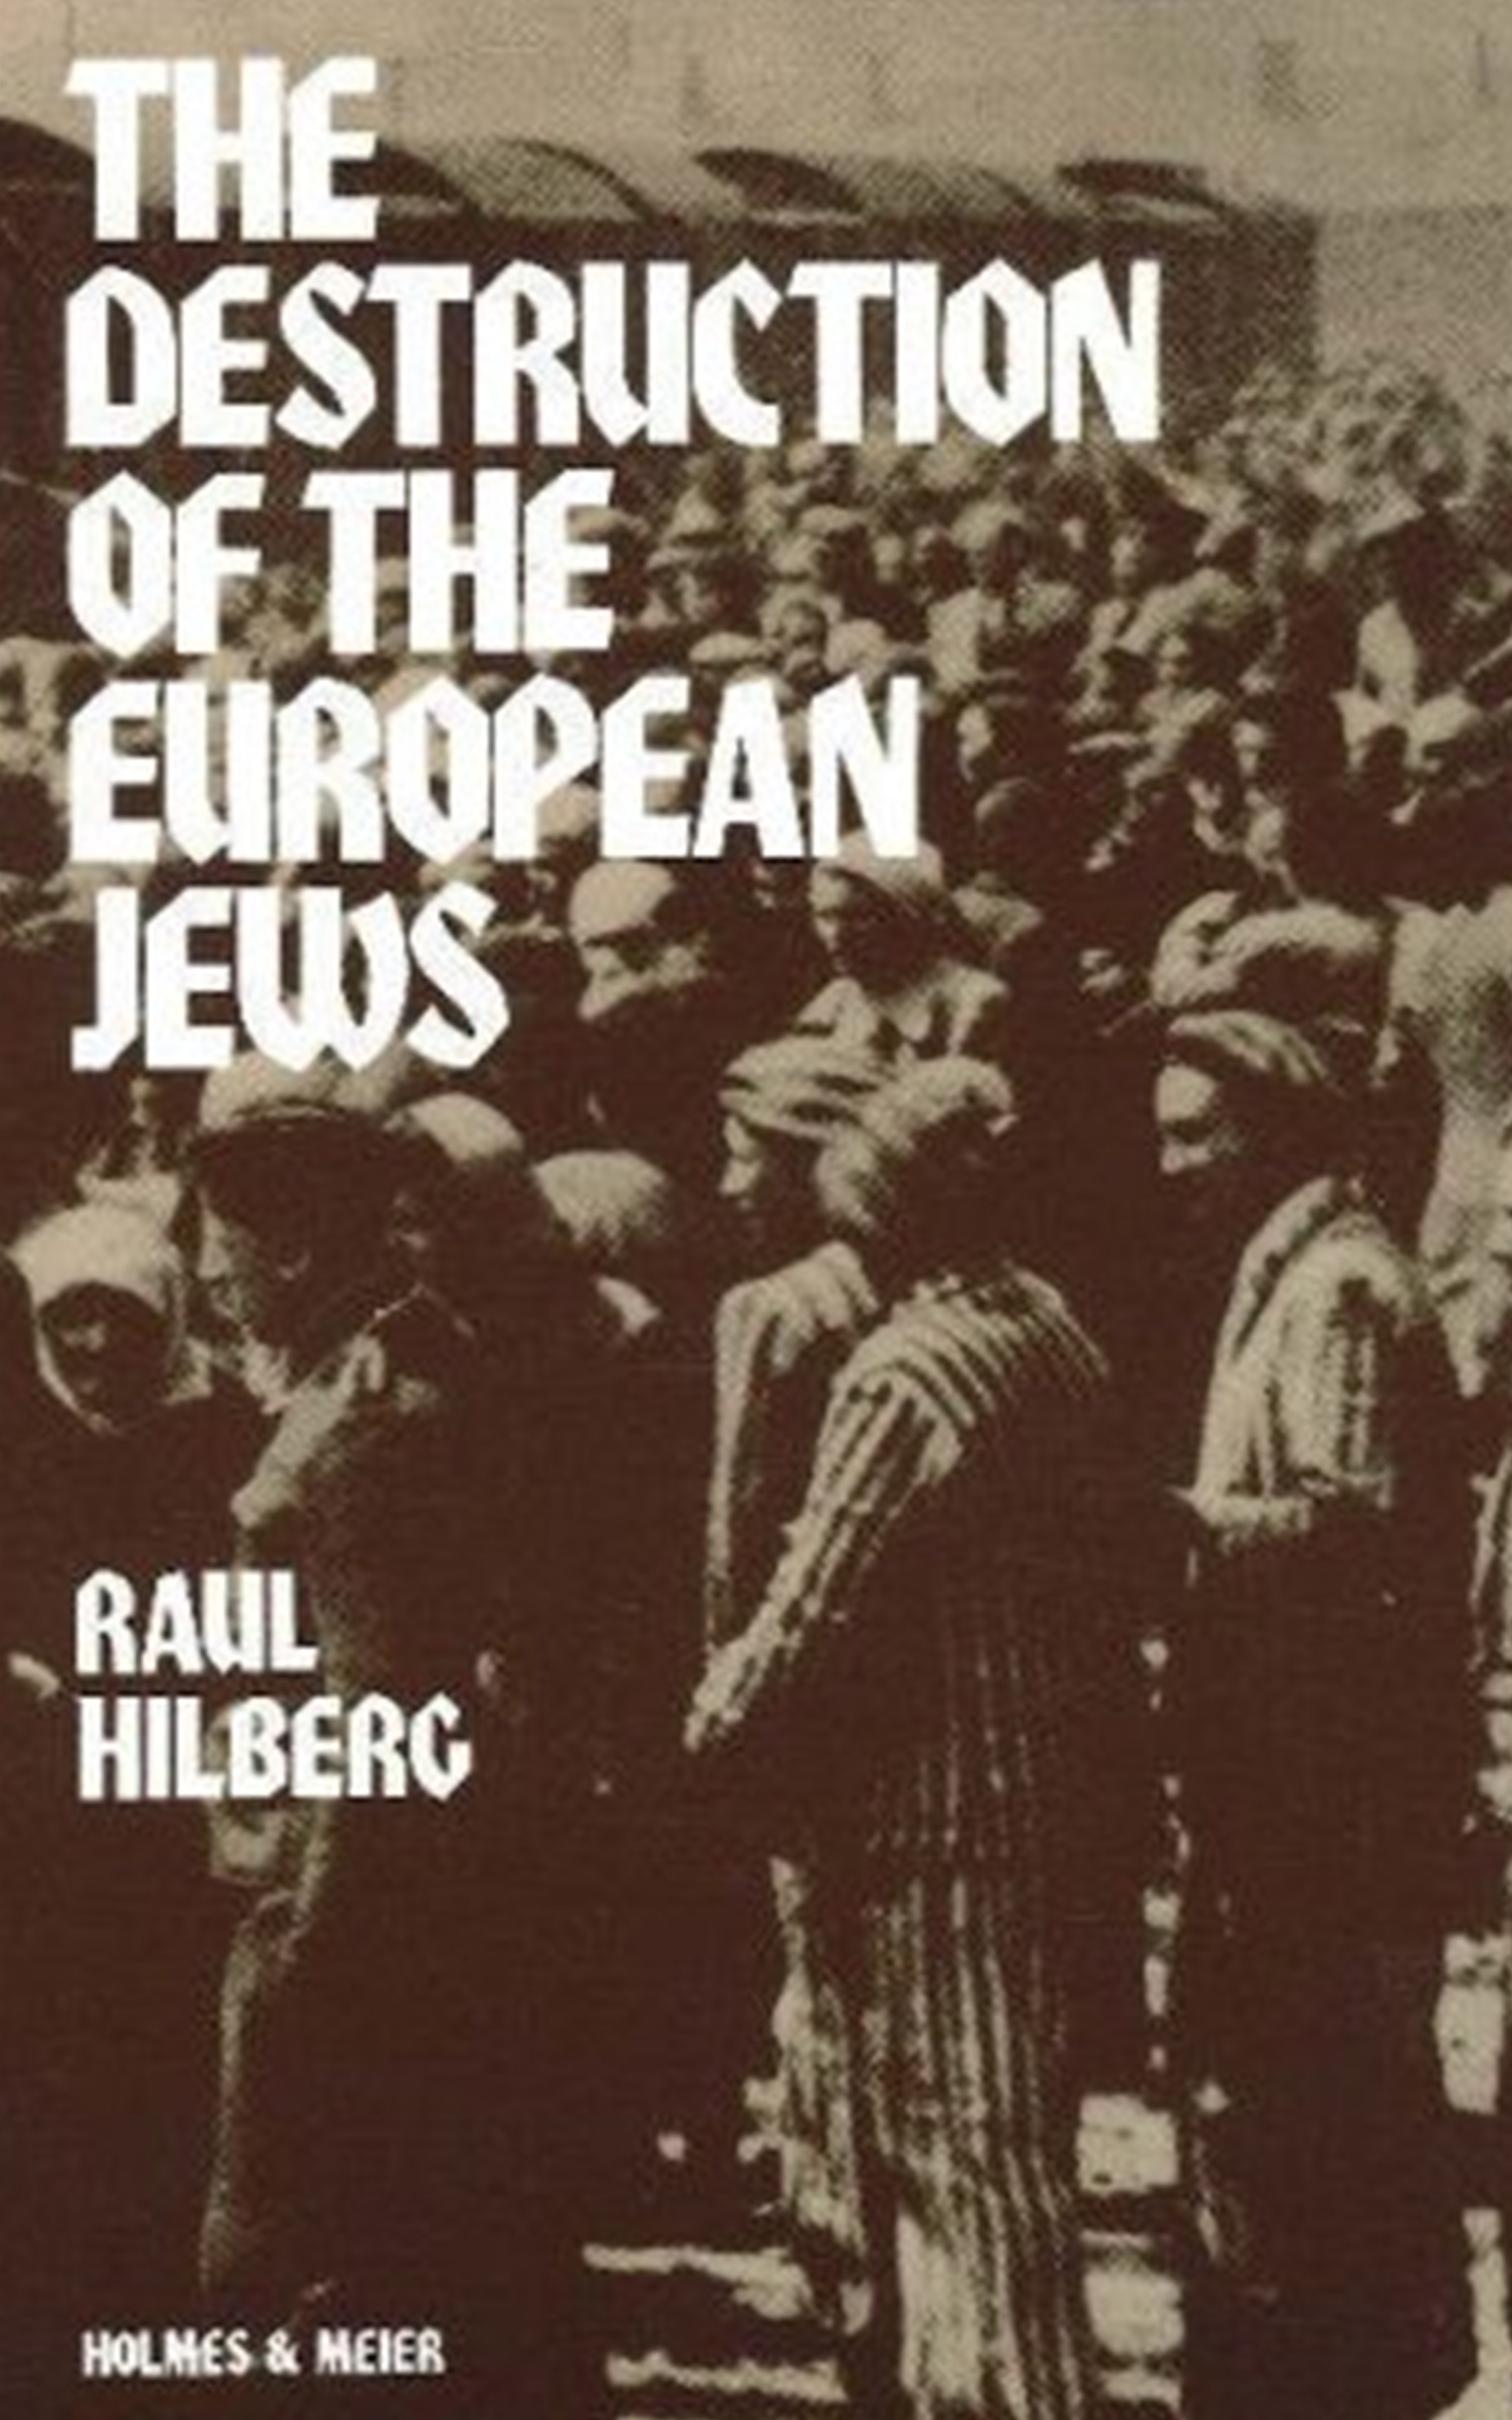 The Destruction of the European Jews, Student Edition by Raul Hilberg